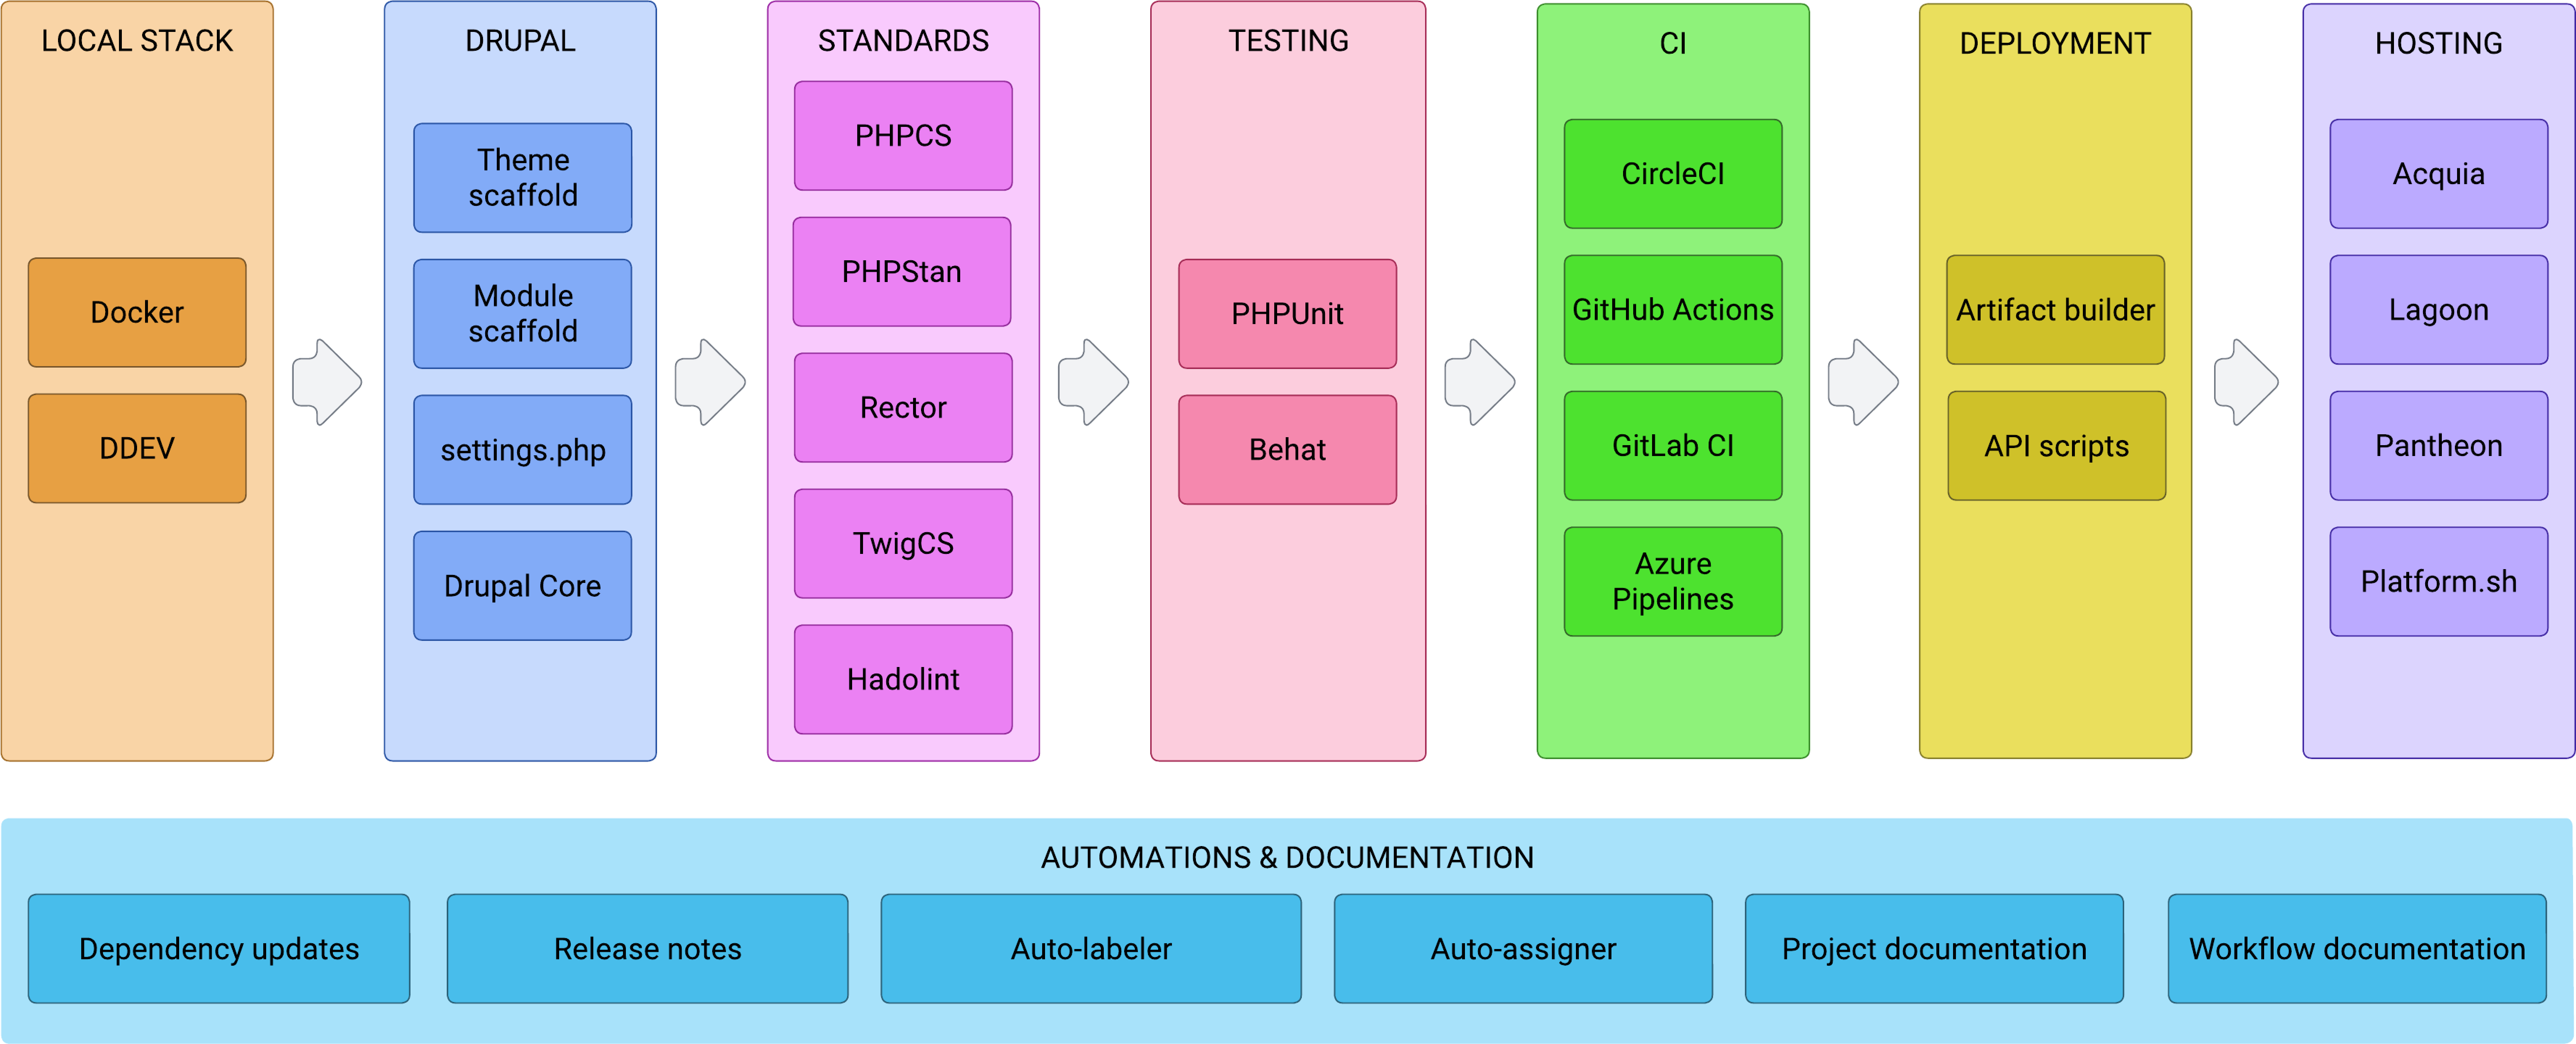 Diagram of services provided by DrevOps Drupal scaffold